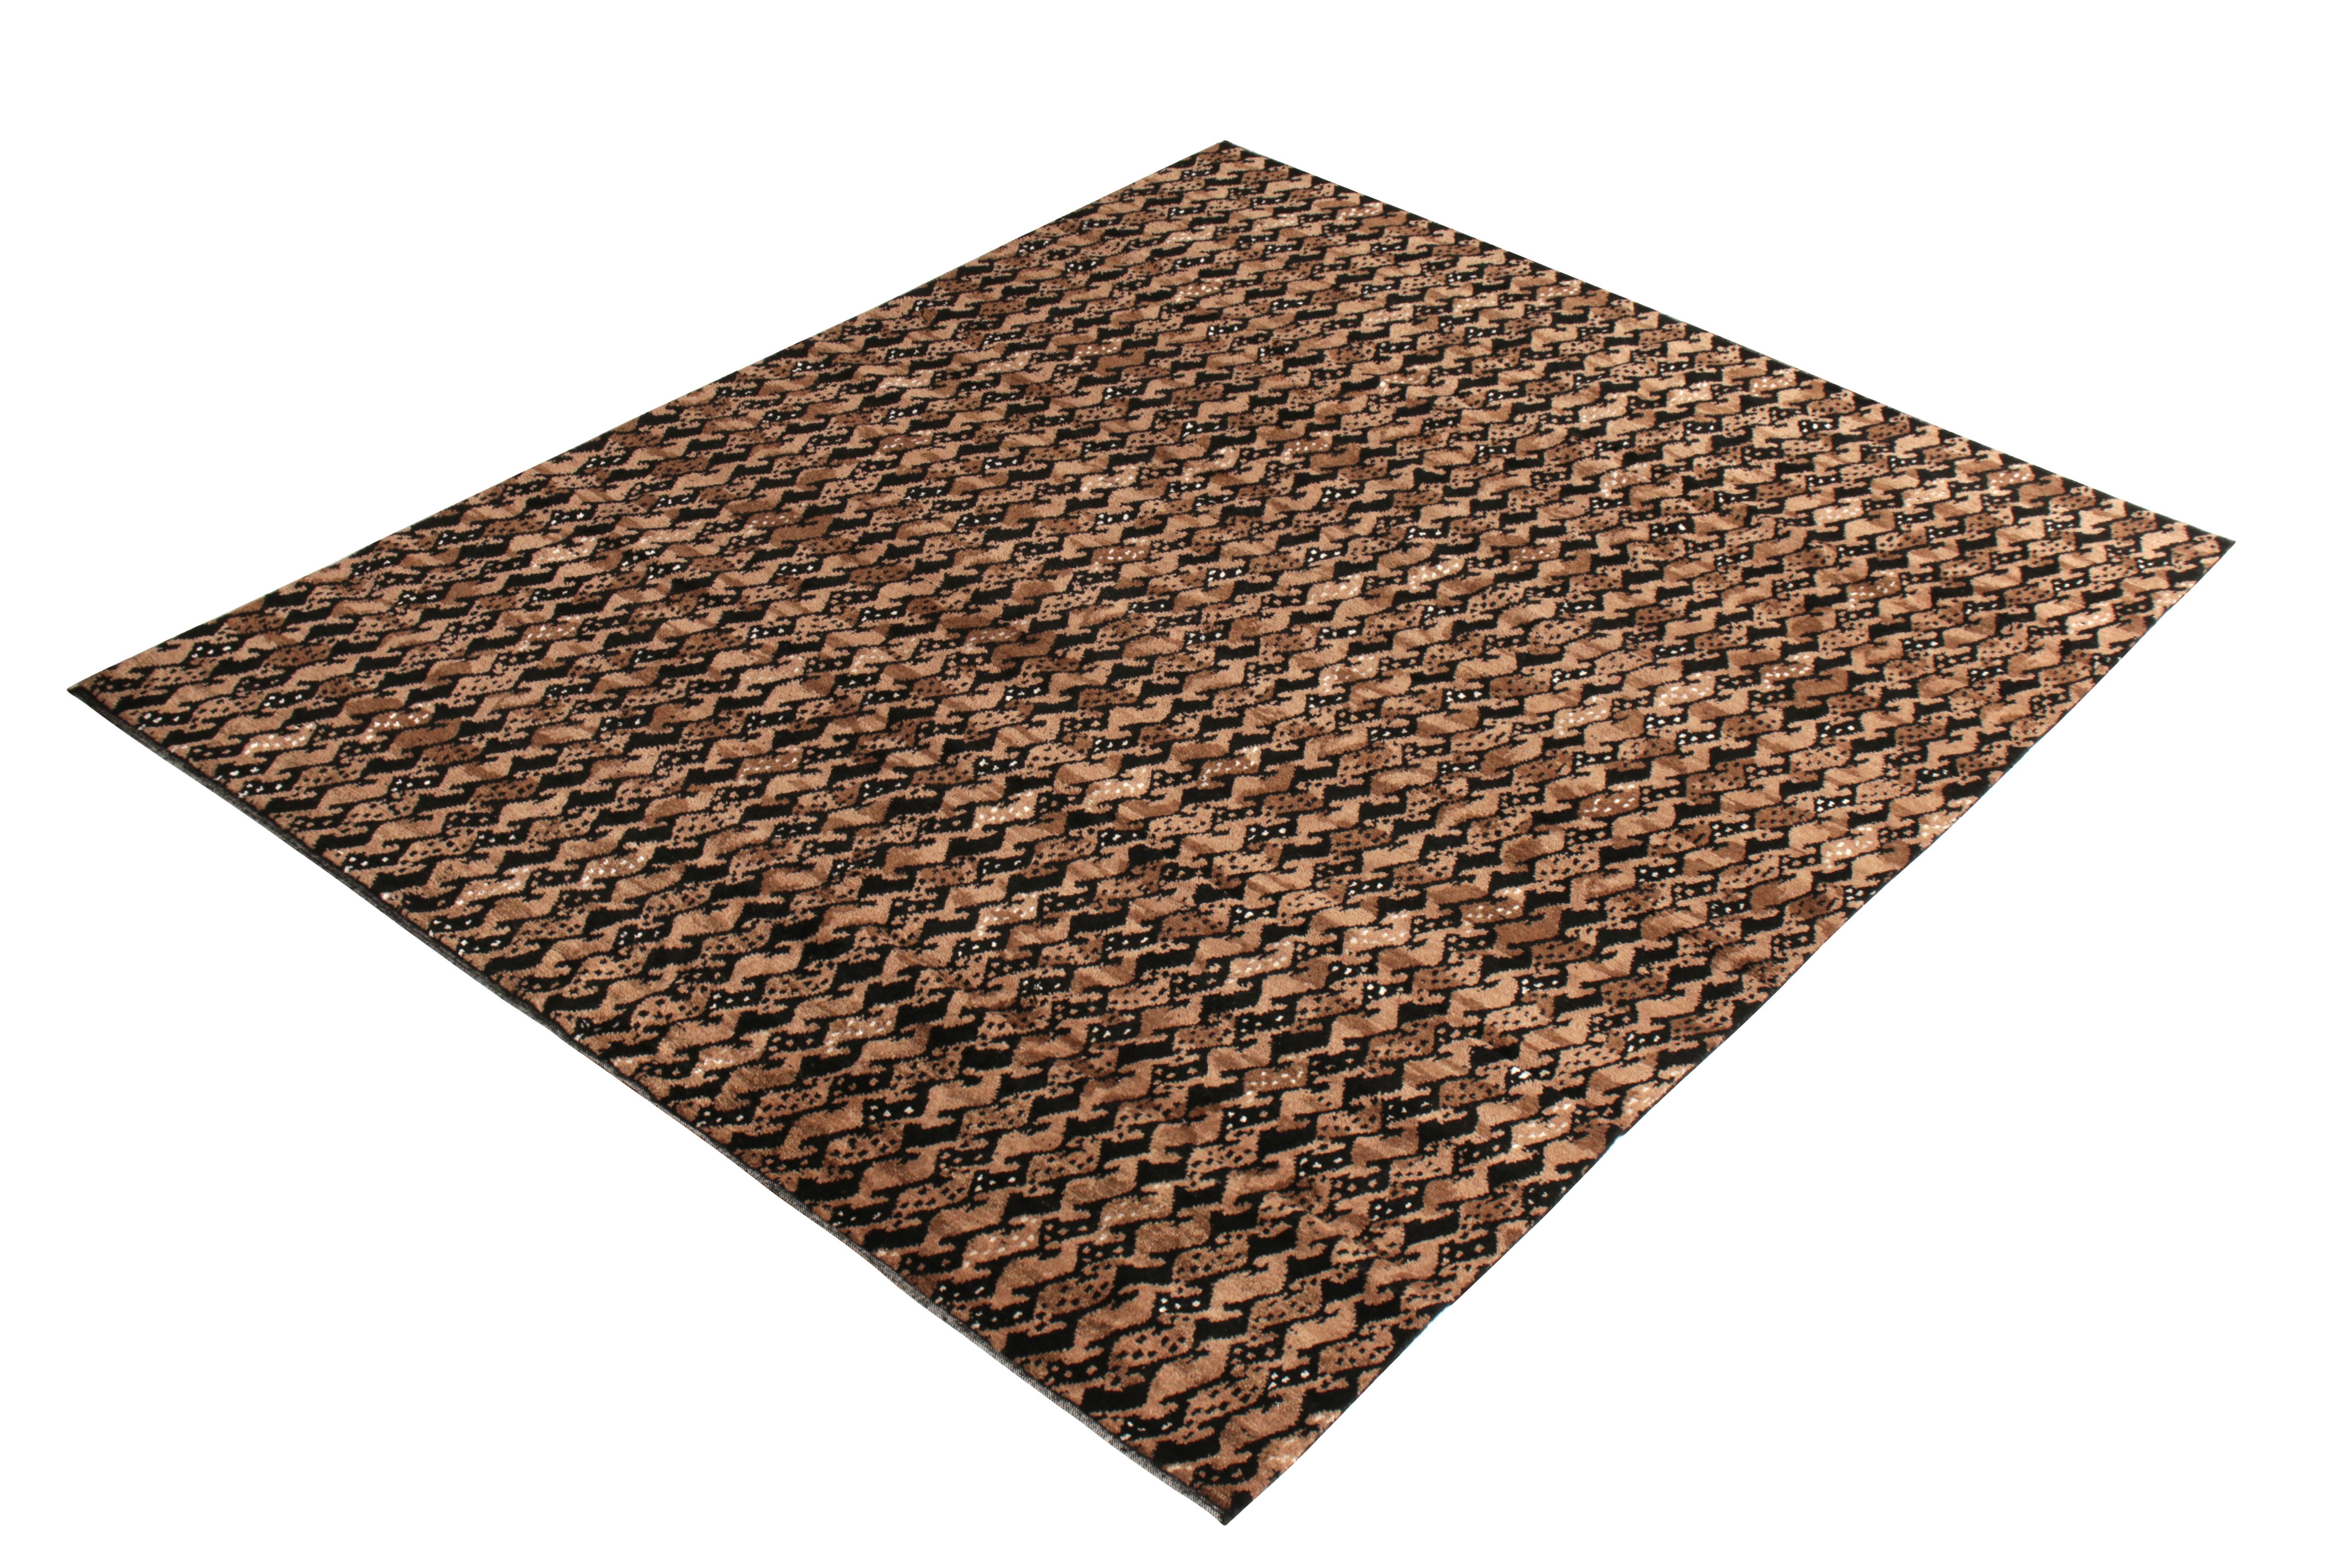 Hand knotted in texturally soft, durable wool pile, this modern 8×10 rug hails from the latest pile additions to Rug & Kilim’s Scandinavian collection, a celebration of Swedish modernism with new large scale geometry and exciting vintage colorways